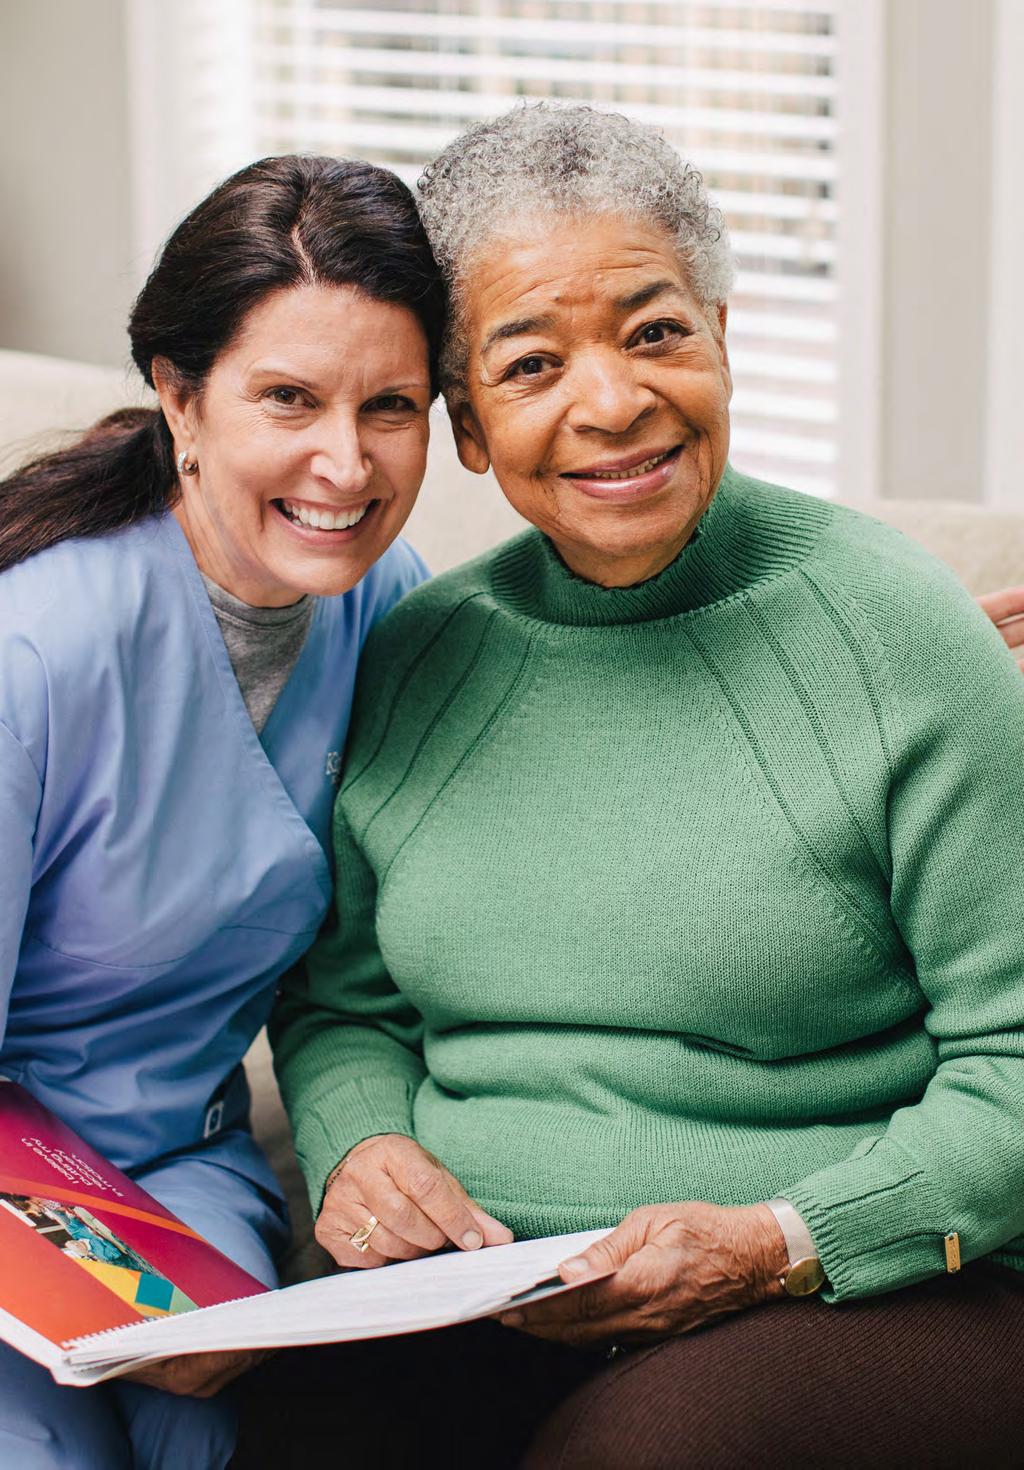 Home Health As the largest provider of skilled home health nationwide, our trained professionals deliver care and services for people who need medical care, are homebound and can avoid an inpatient